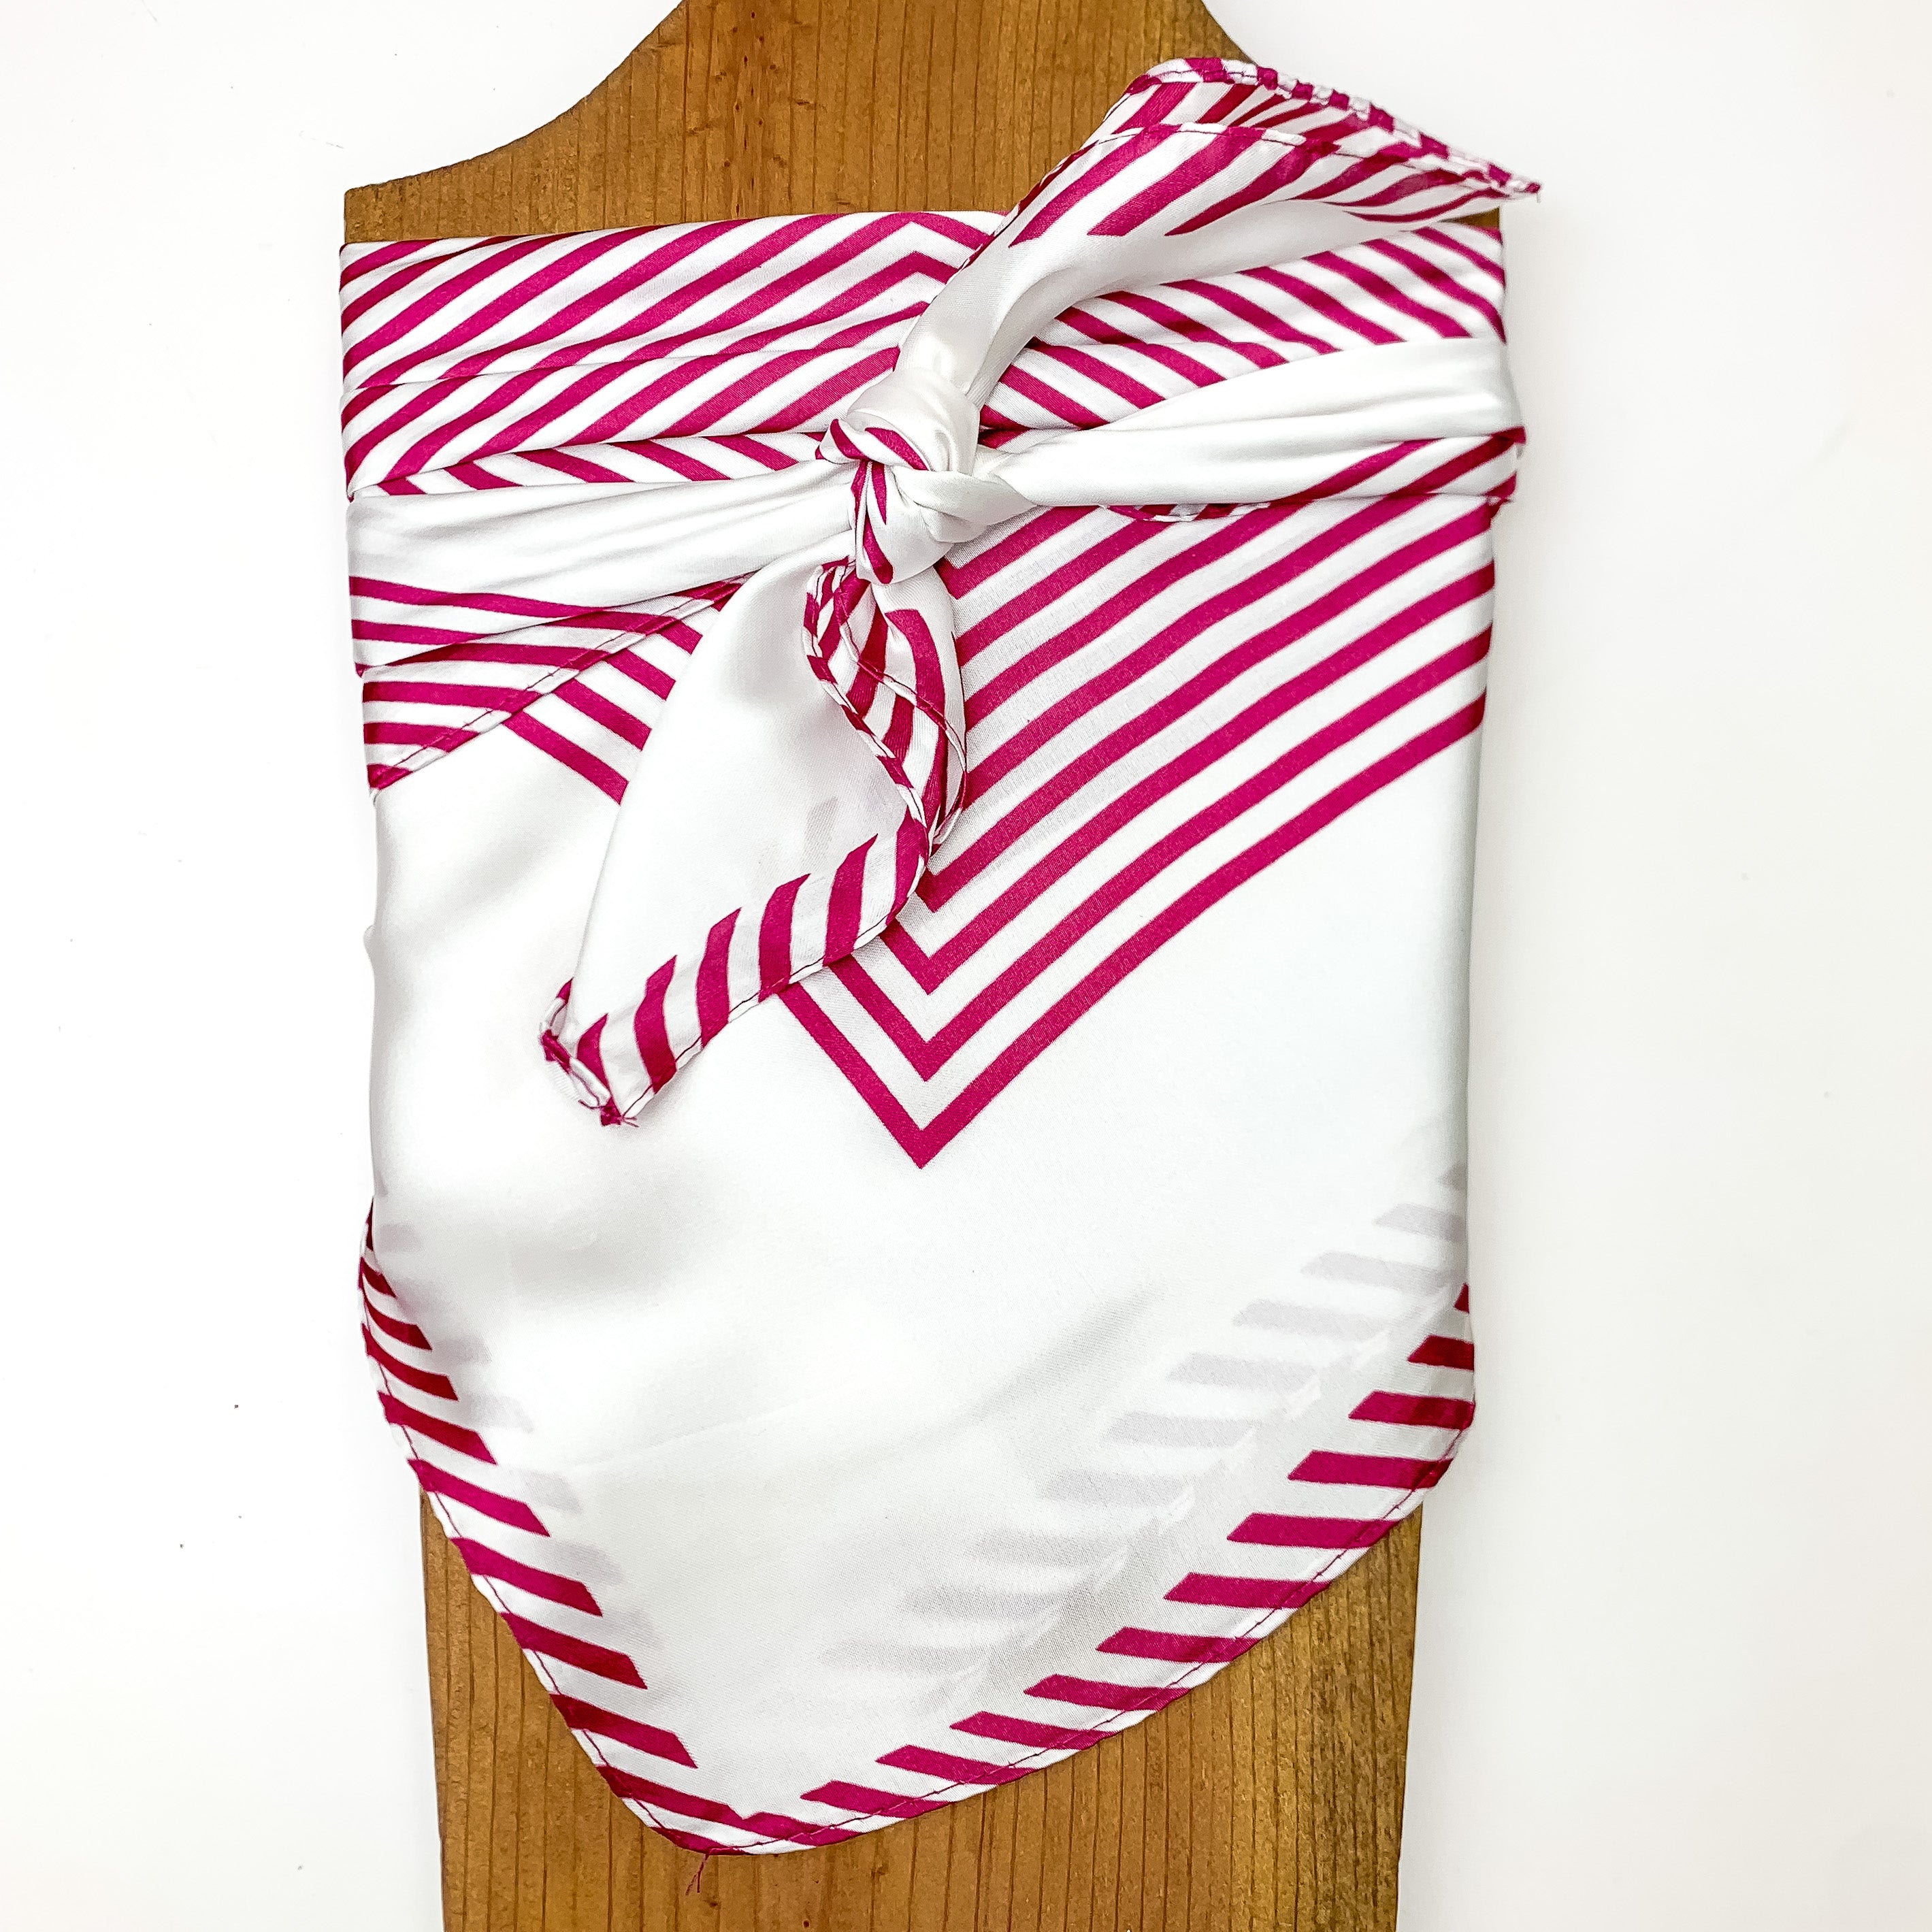 Stripped Wild Rag in White and Maroon. Pictured tied around a wood piece with a white background.